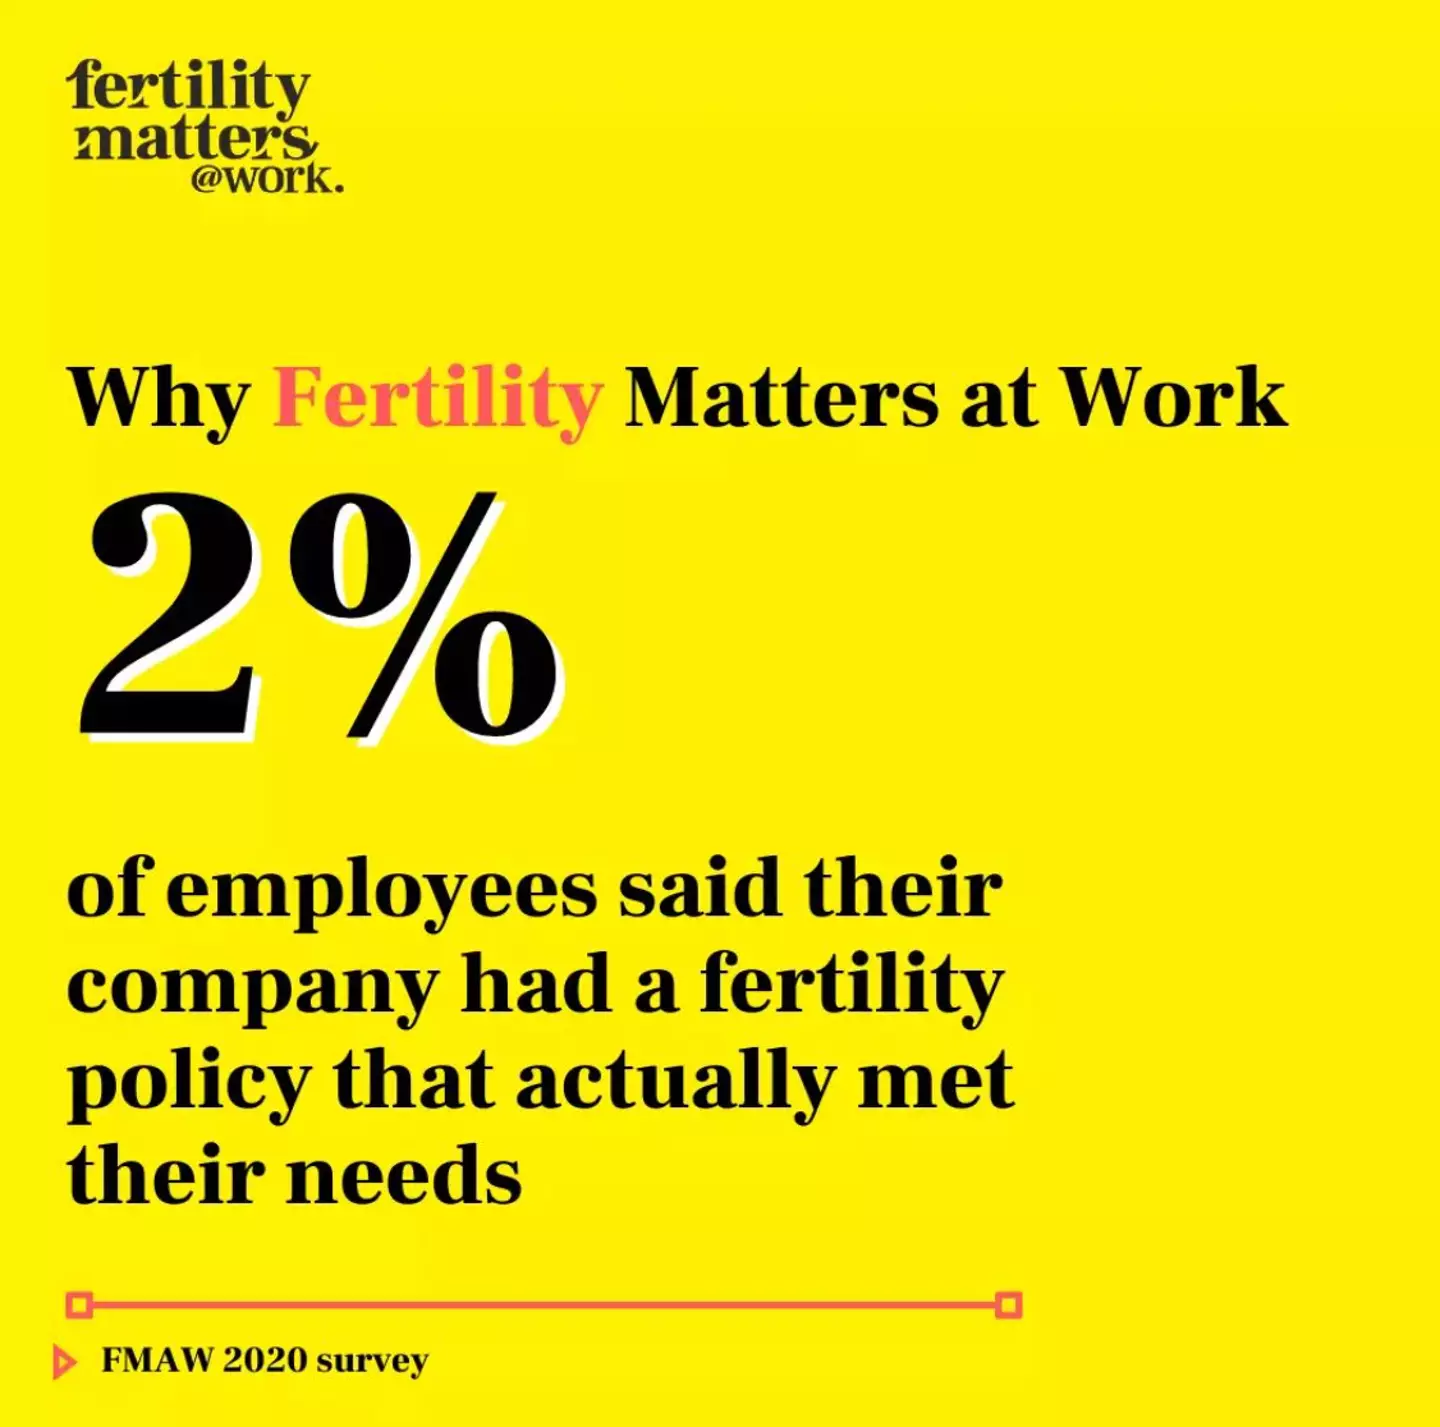 Fertility Matters at Work found two percent of employees said their company had fertility policies which actually met their needs.